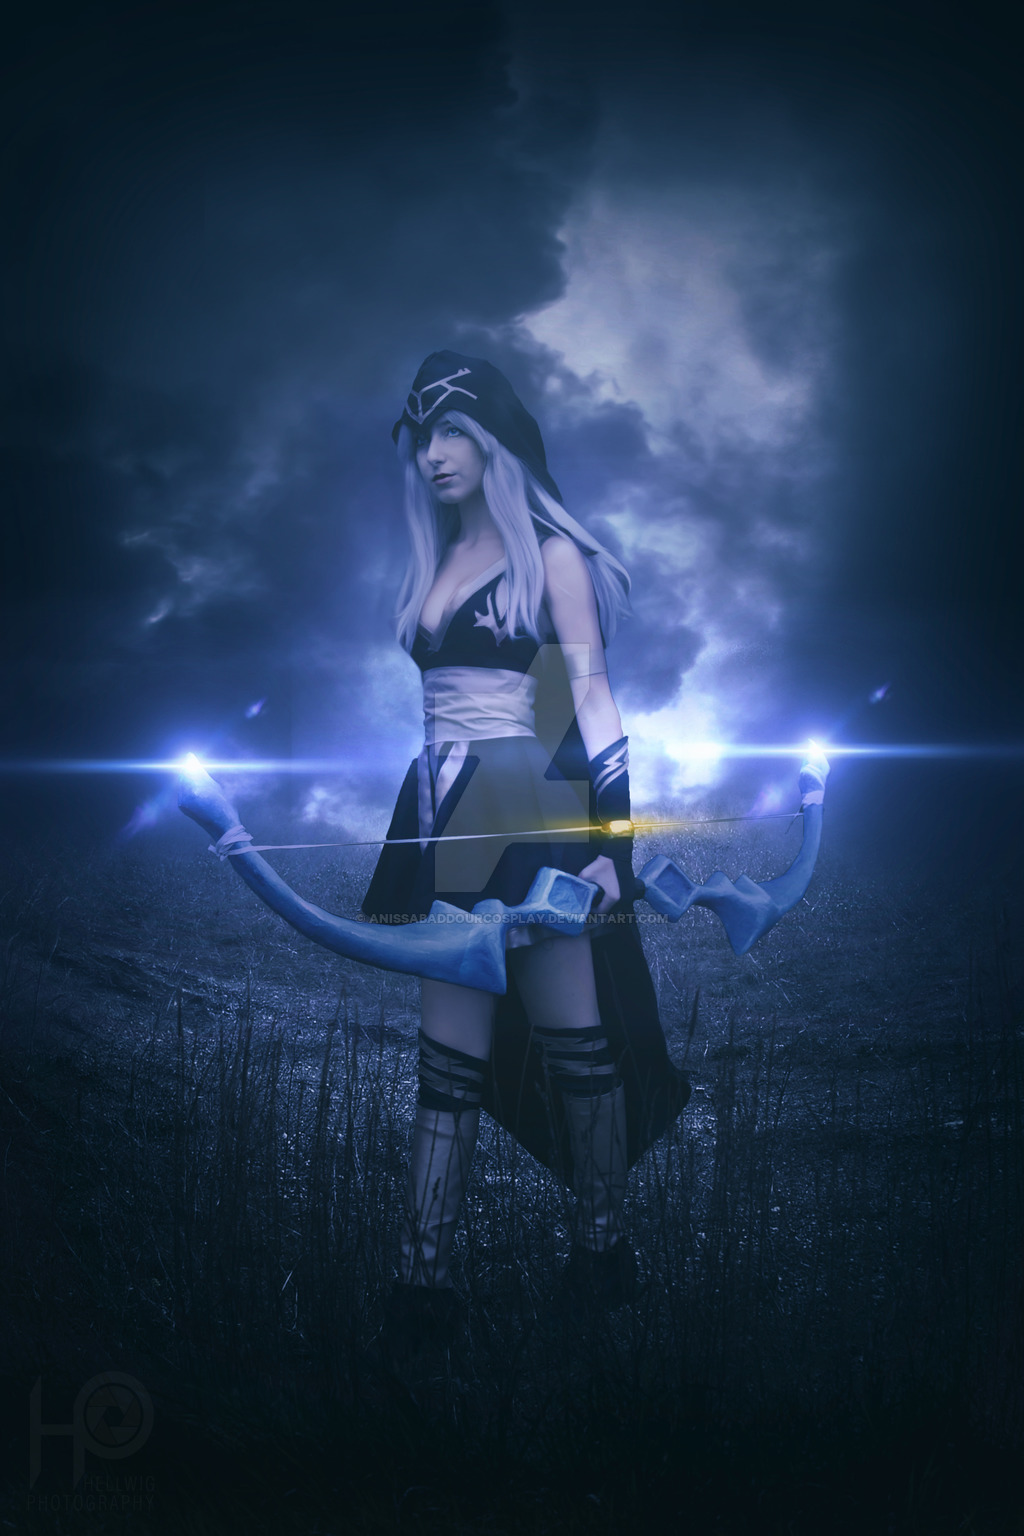 ashe_cosplay___league_of_legends_by_anissabaddourcosplay-d84wgxo.jpg